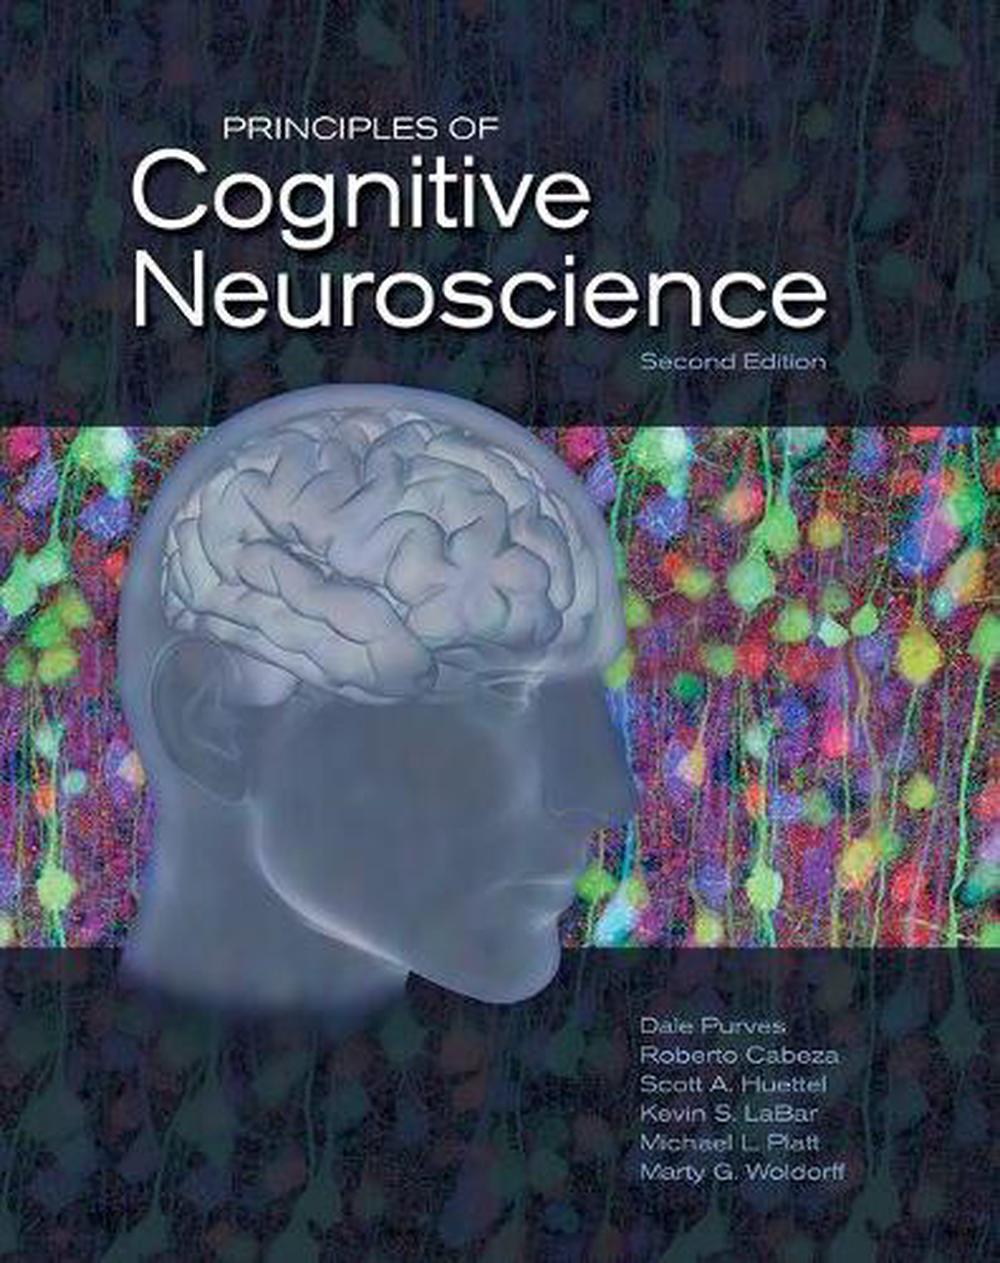 Principles of Cognitive Neuroscience by Dale Purves (English) Hardcover Book Fre 9780878935734